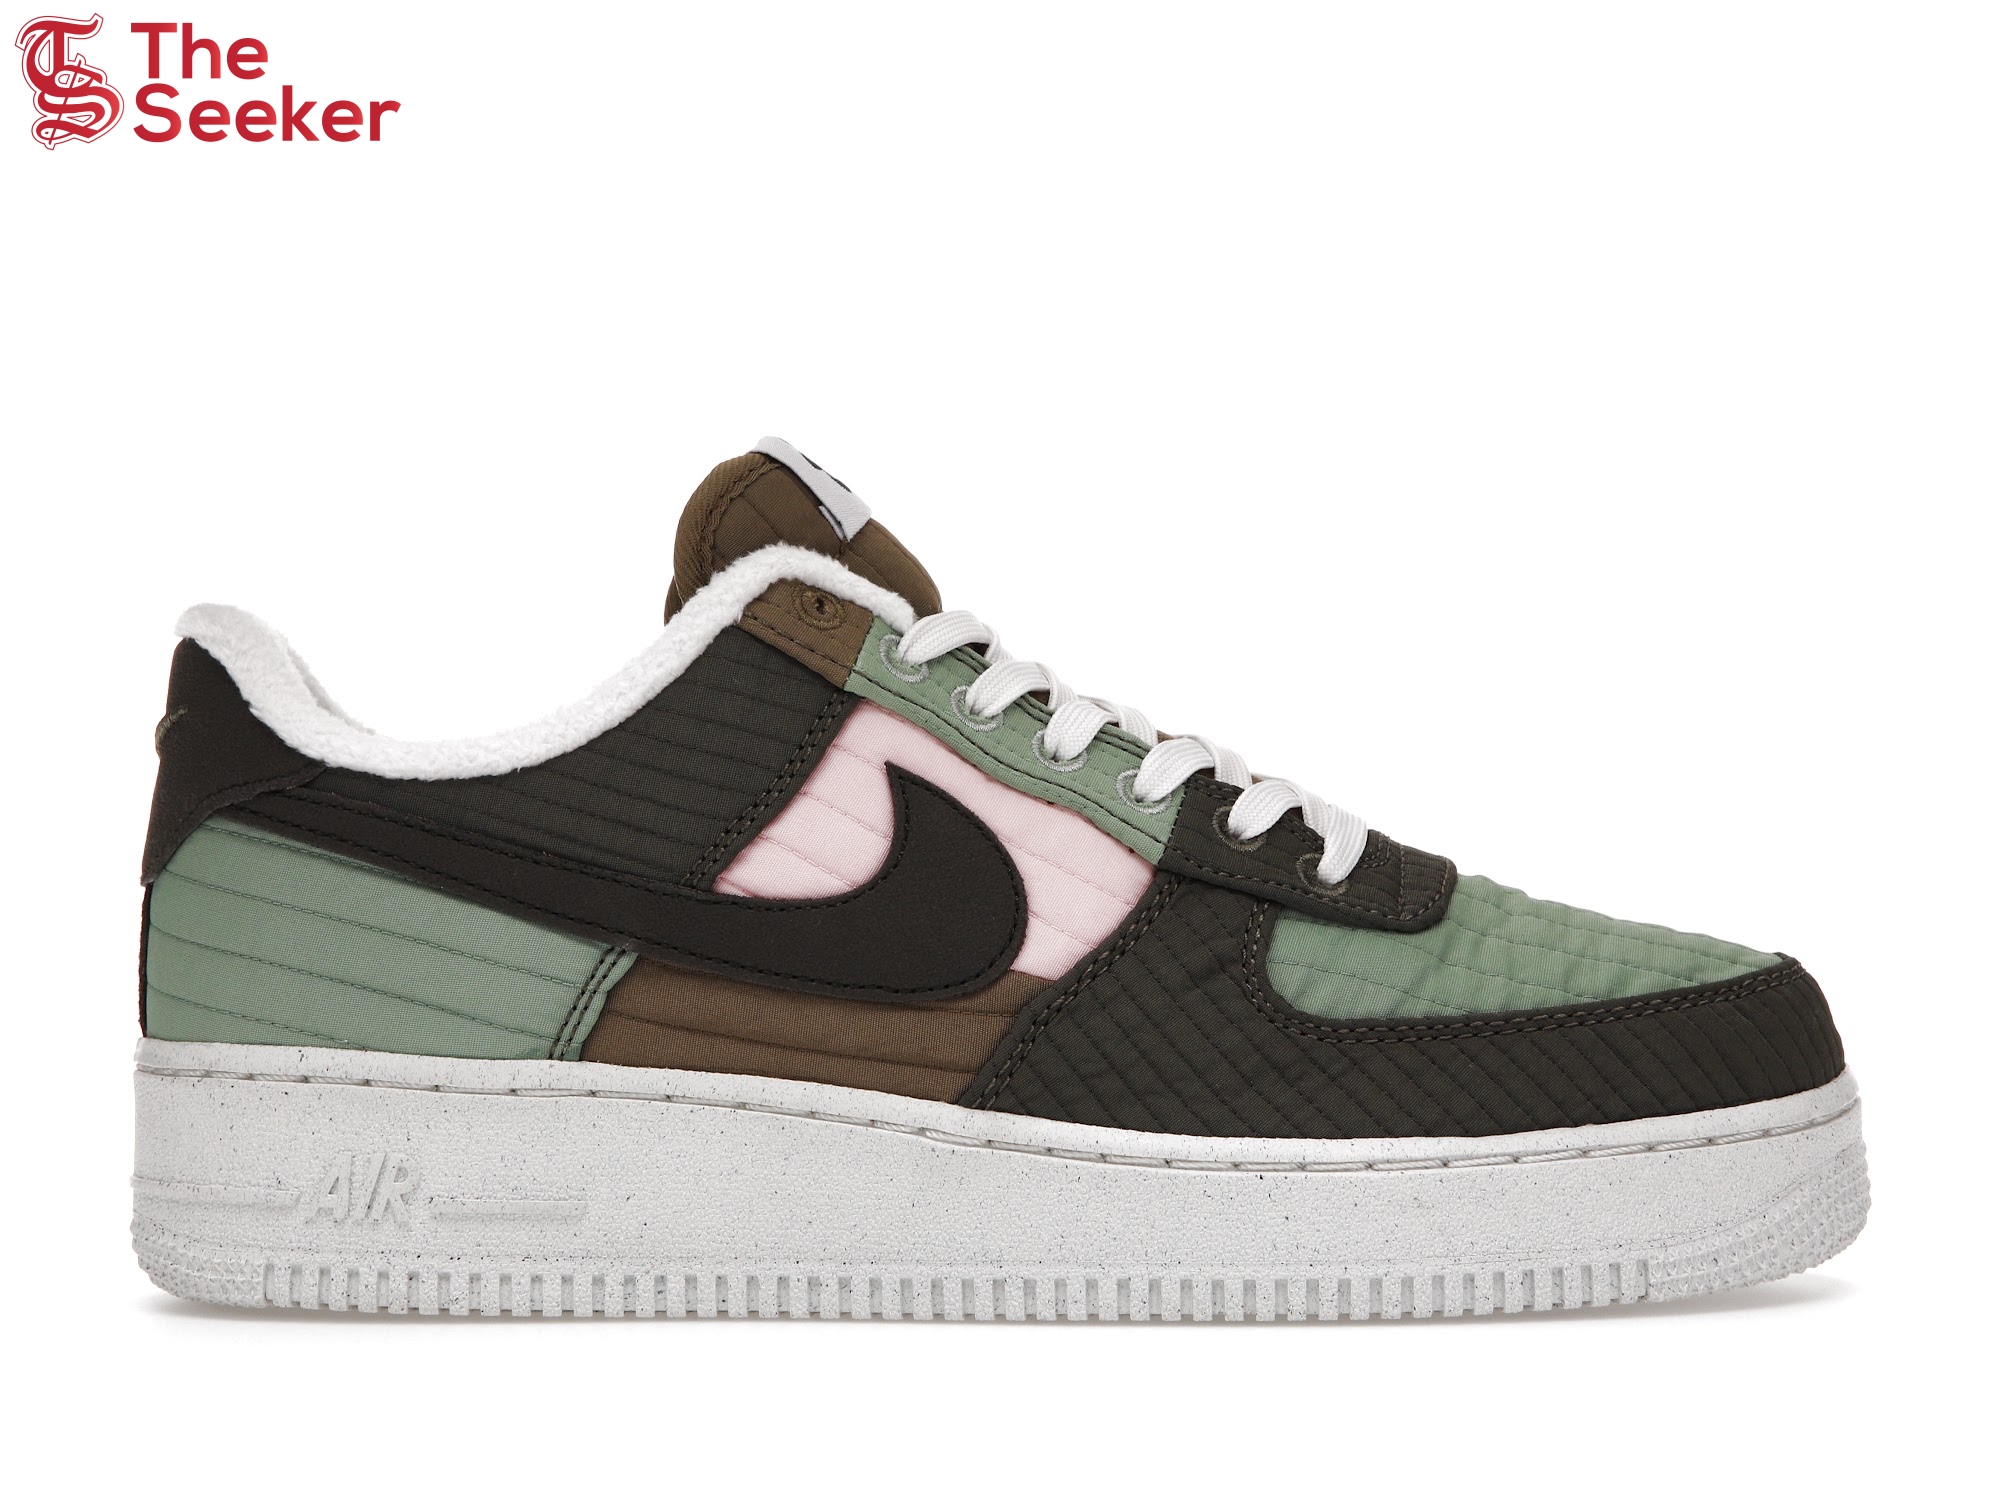 Nike Air Force 1 '07 LX Low Toasty Oil Green